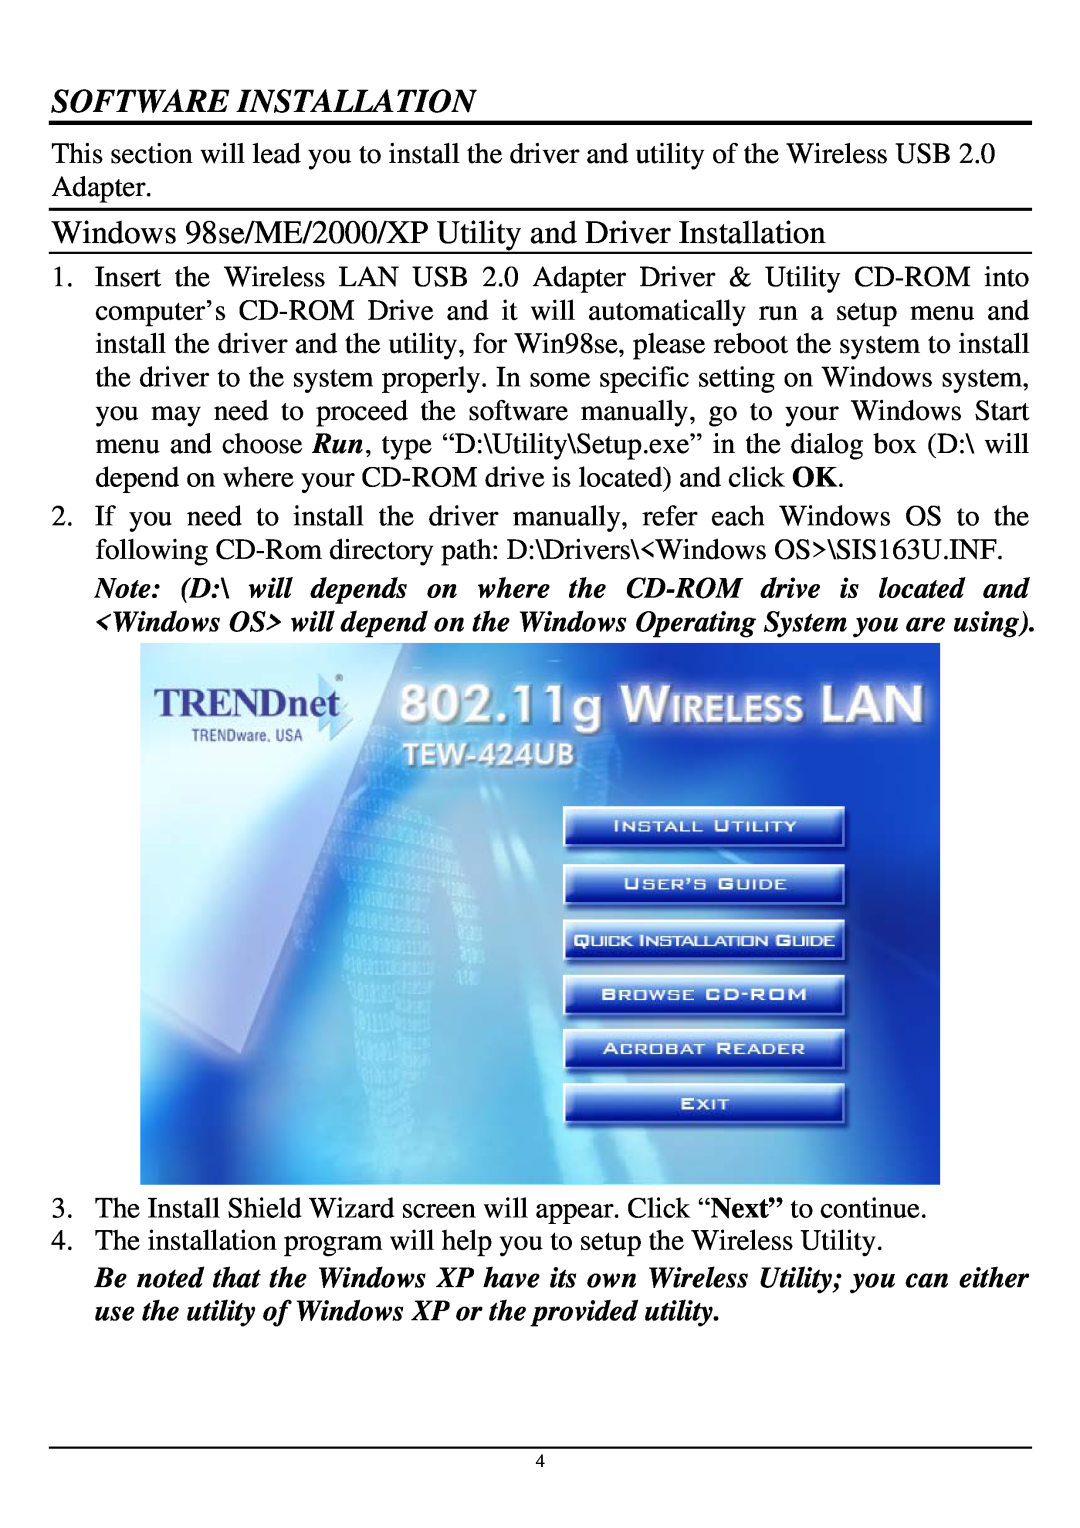 TRENDnet TEW-424UB manual Software Installation, Windows 98se/ME/2000/XP Utility and Driver Installation 